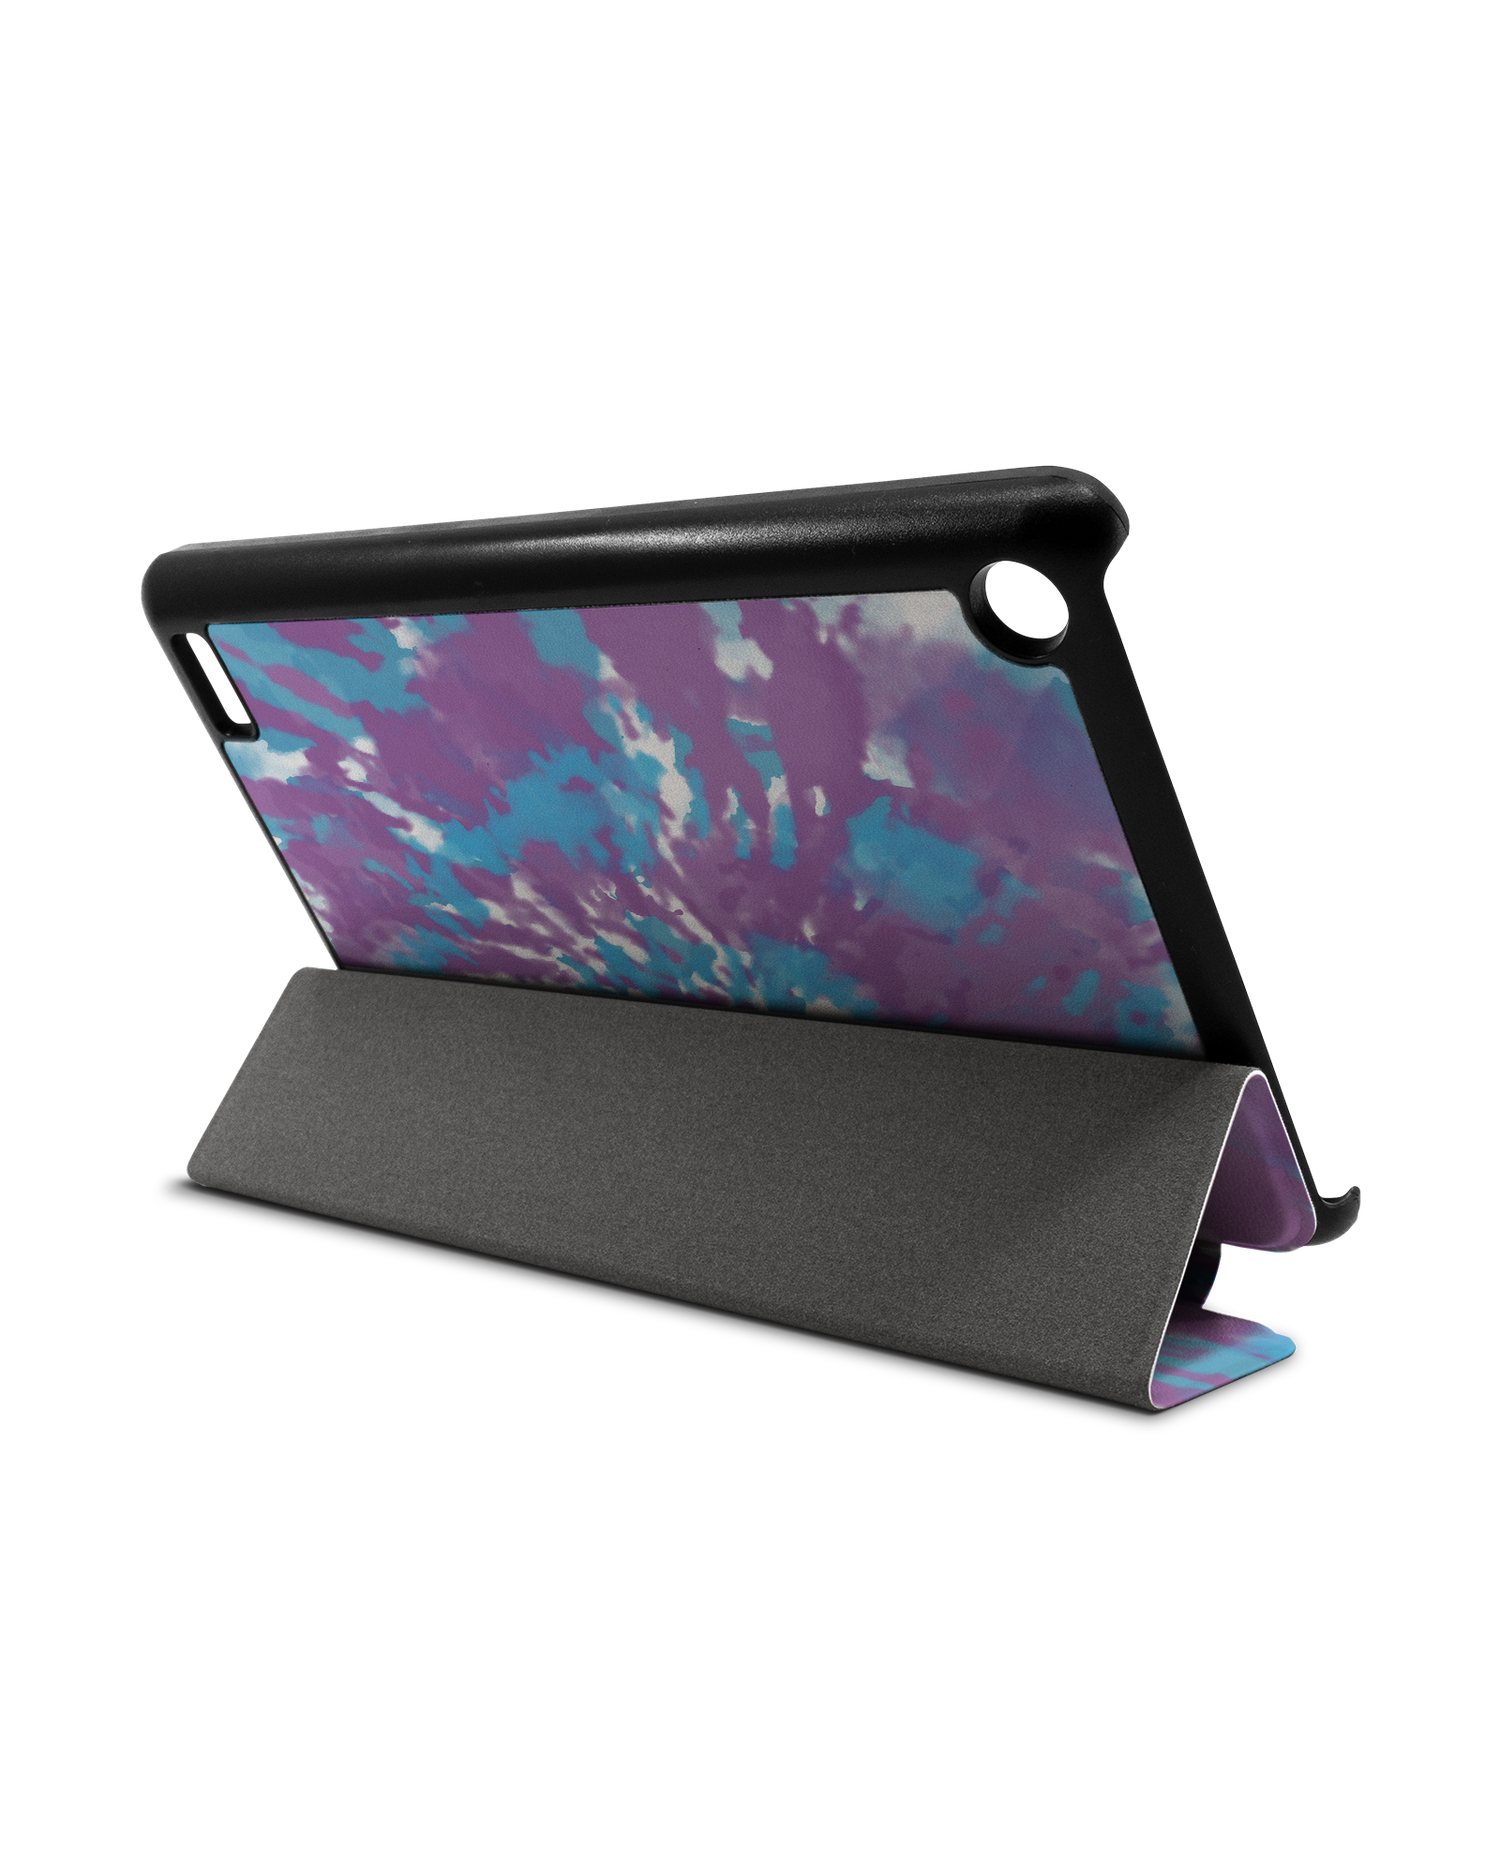 Classic Tie Dye Tablet Smart Case for Amazon Fire 7: Used as Stand